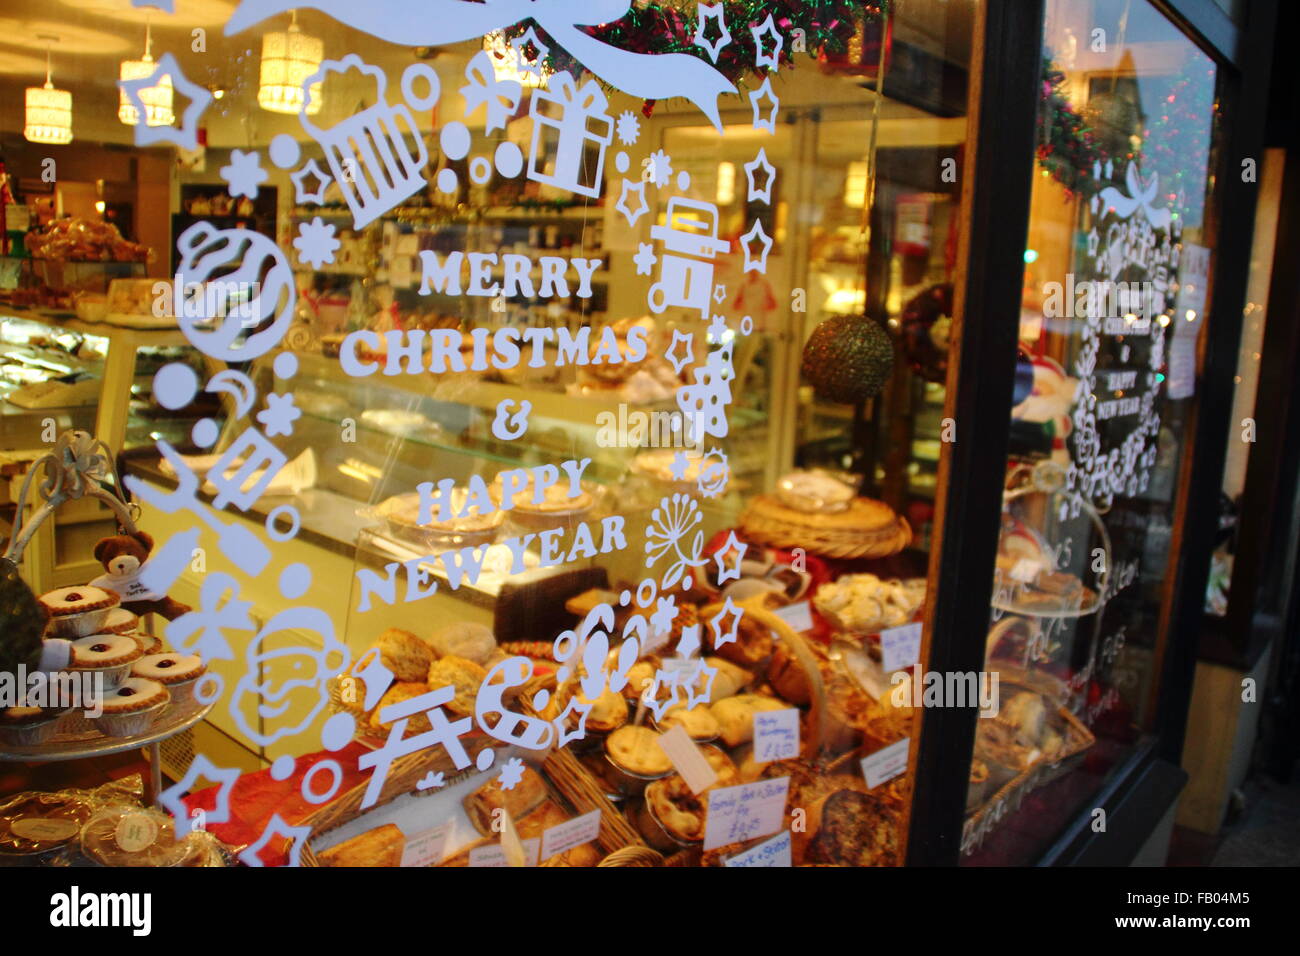 A sign wishing passers by and customers a  Merry Christmas displayed on the shop window of a bakery in Bakewell Peak District UK Stock Photo